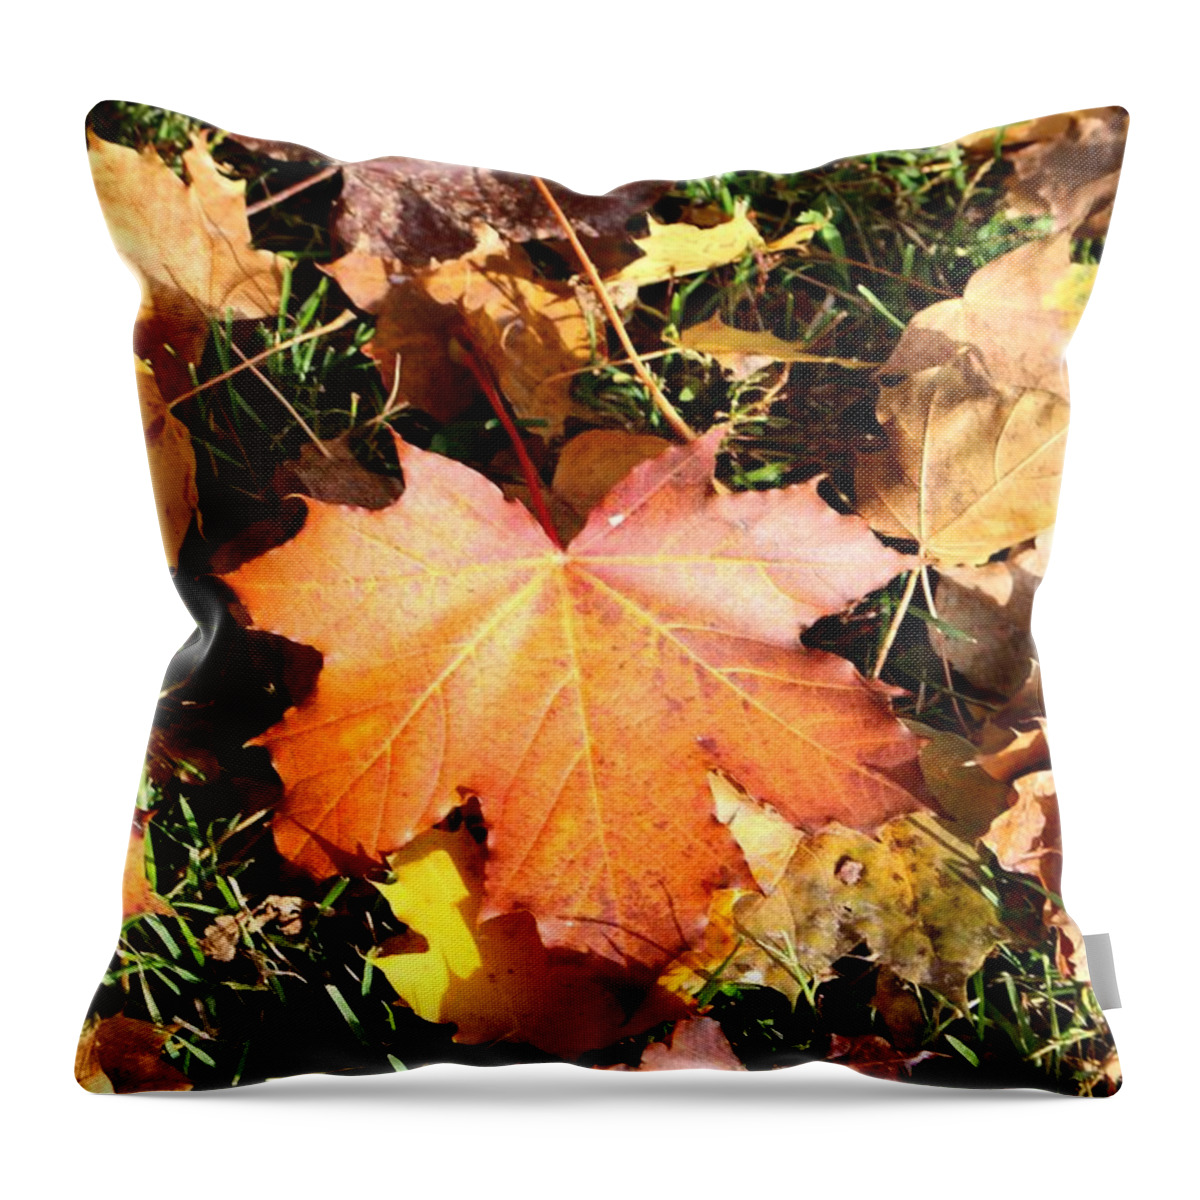 Leaf Leafs Autumn Fall Green Yellow Orange Green Black Brown Nature Landscape Earthy Scandinavia Europe Outdoors Landscape Photo Norge Mark Earth Colors Colorful Beautiful Beauty Pretty Fabulous Good Bright Daylight Peaceful Daytime Throw Pillow featuring the digital art Autumn Orange by Jeanette Rode Dybdahl